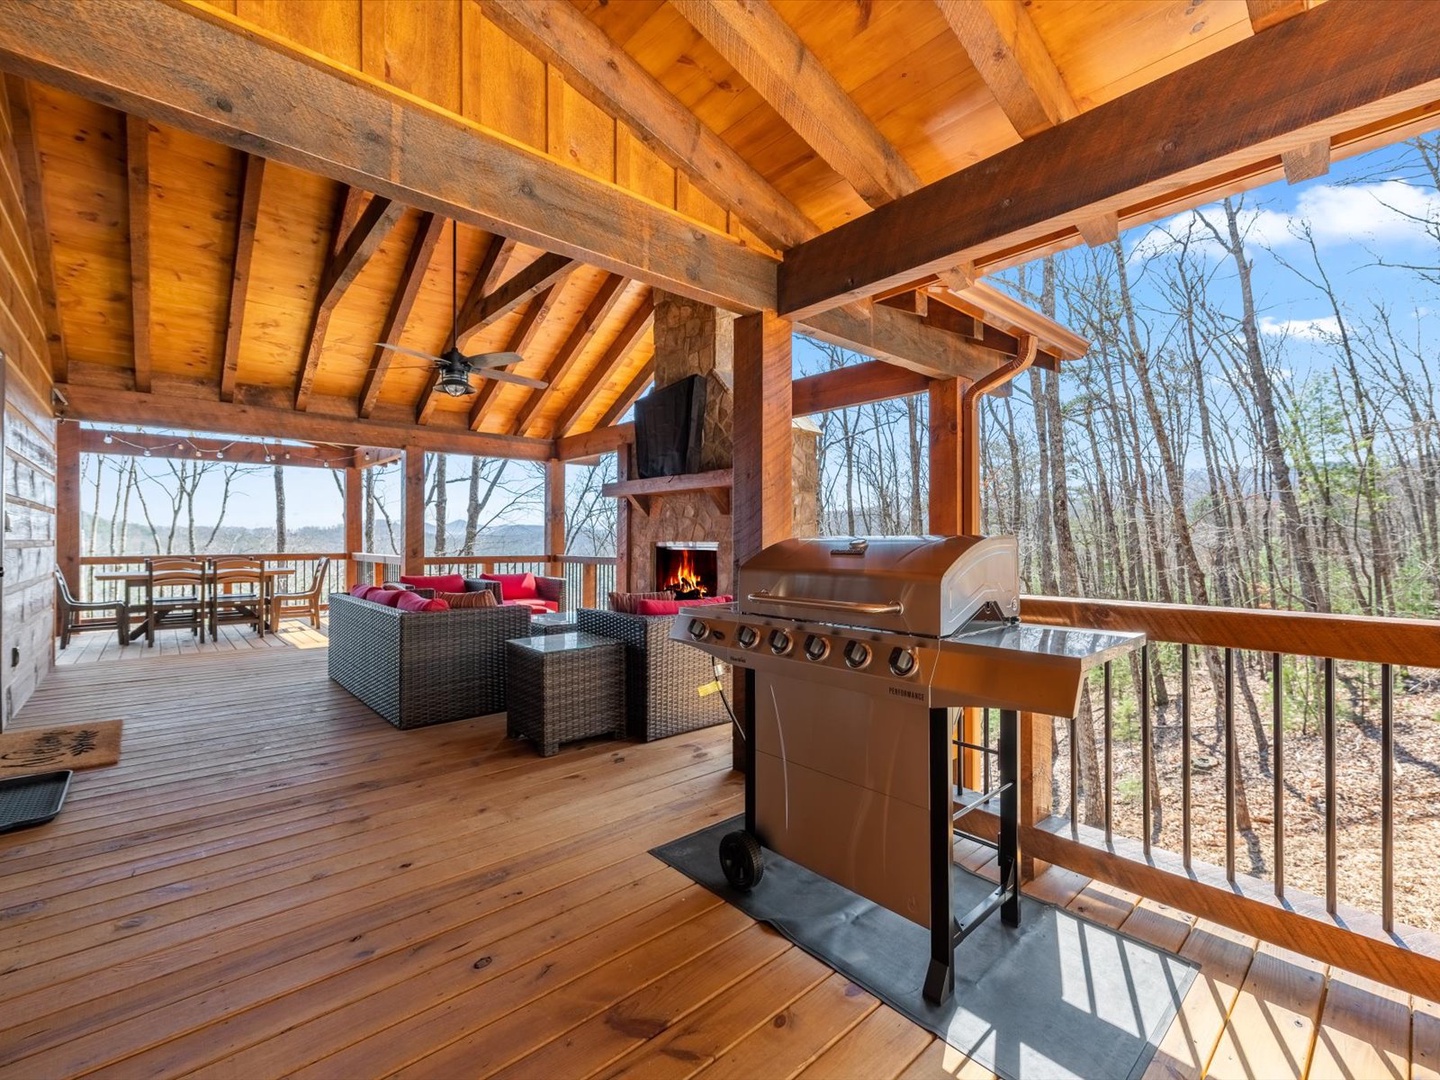 Tranquil Escape of Blue Ridge - Entry Level Entertaining Deck with Grill Station